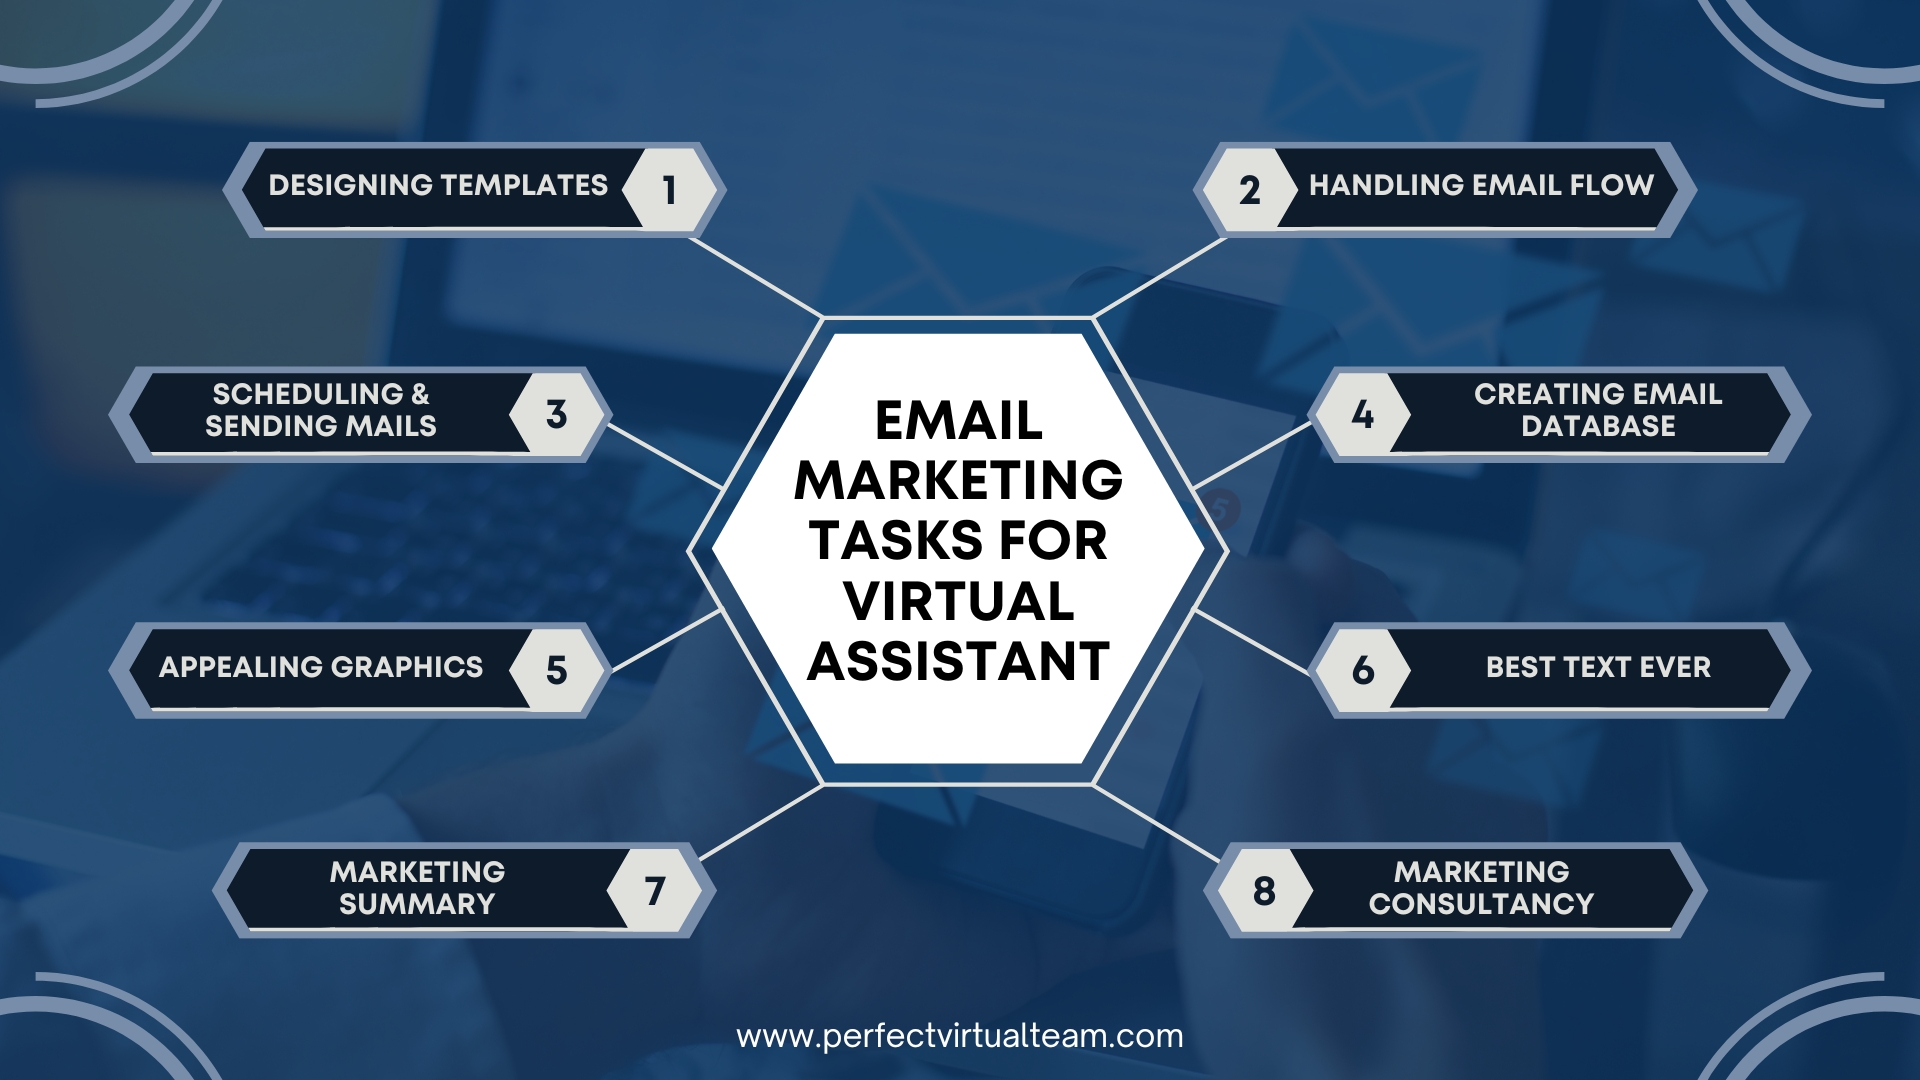 Email Marketing Tasks for Virtual Assistant